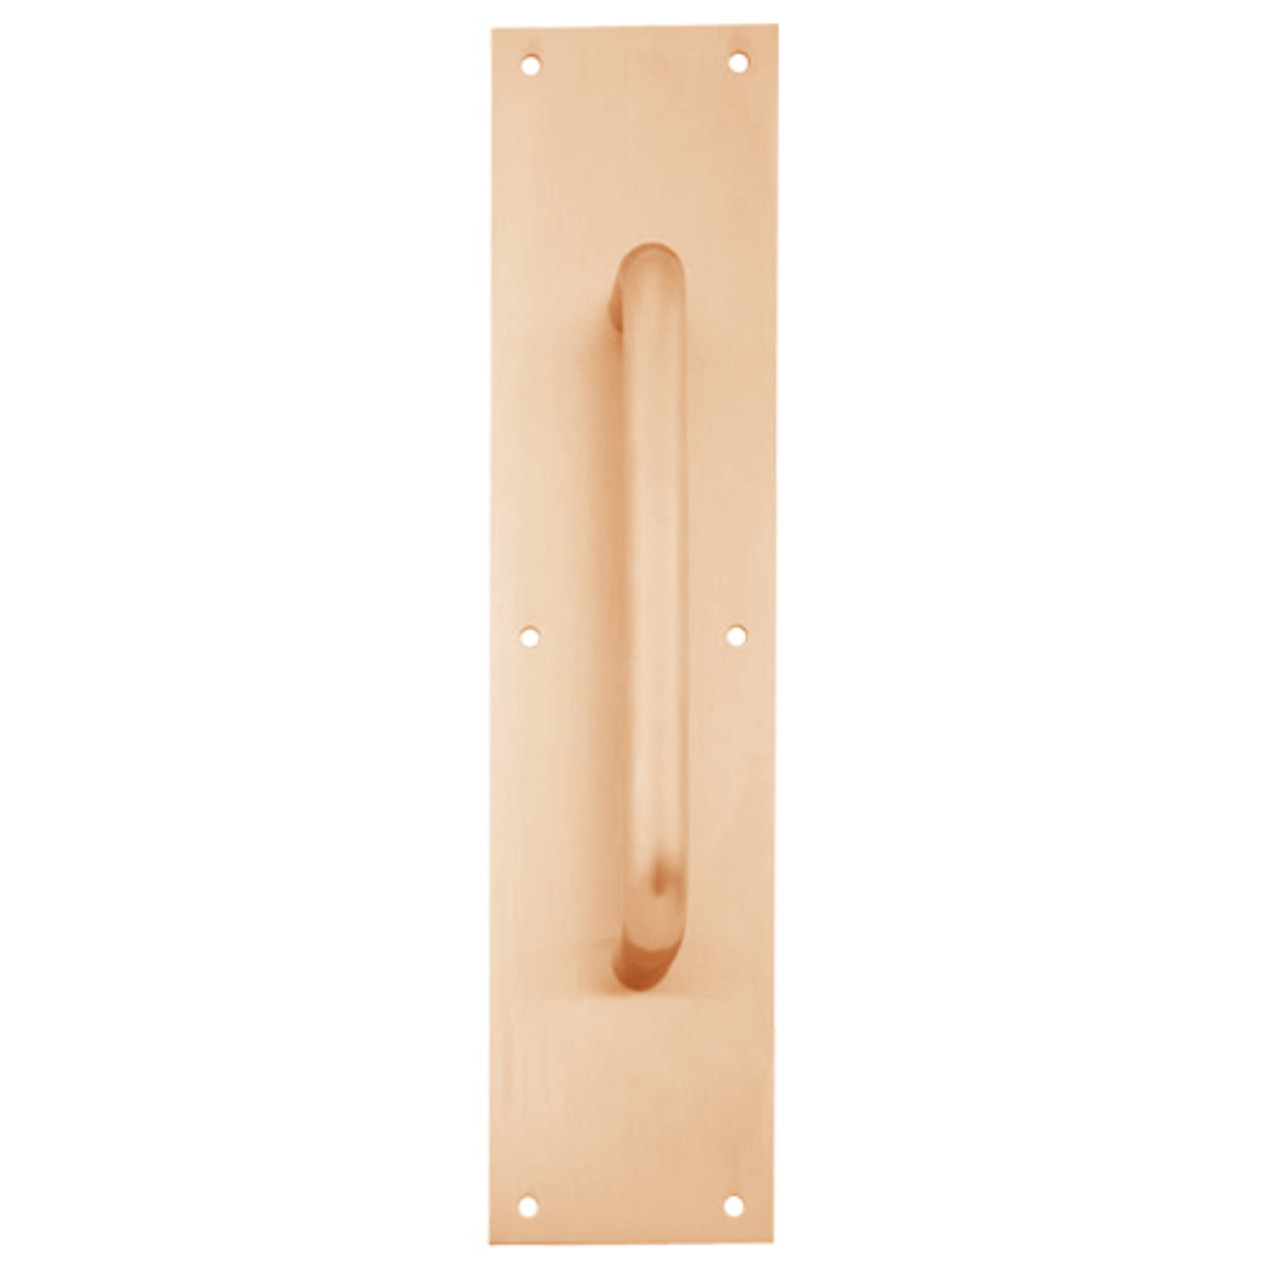 8302-10-US10-6x16 IVES Architectural Door Trim 6x16 Inch Pull Plate in Satin Bronze